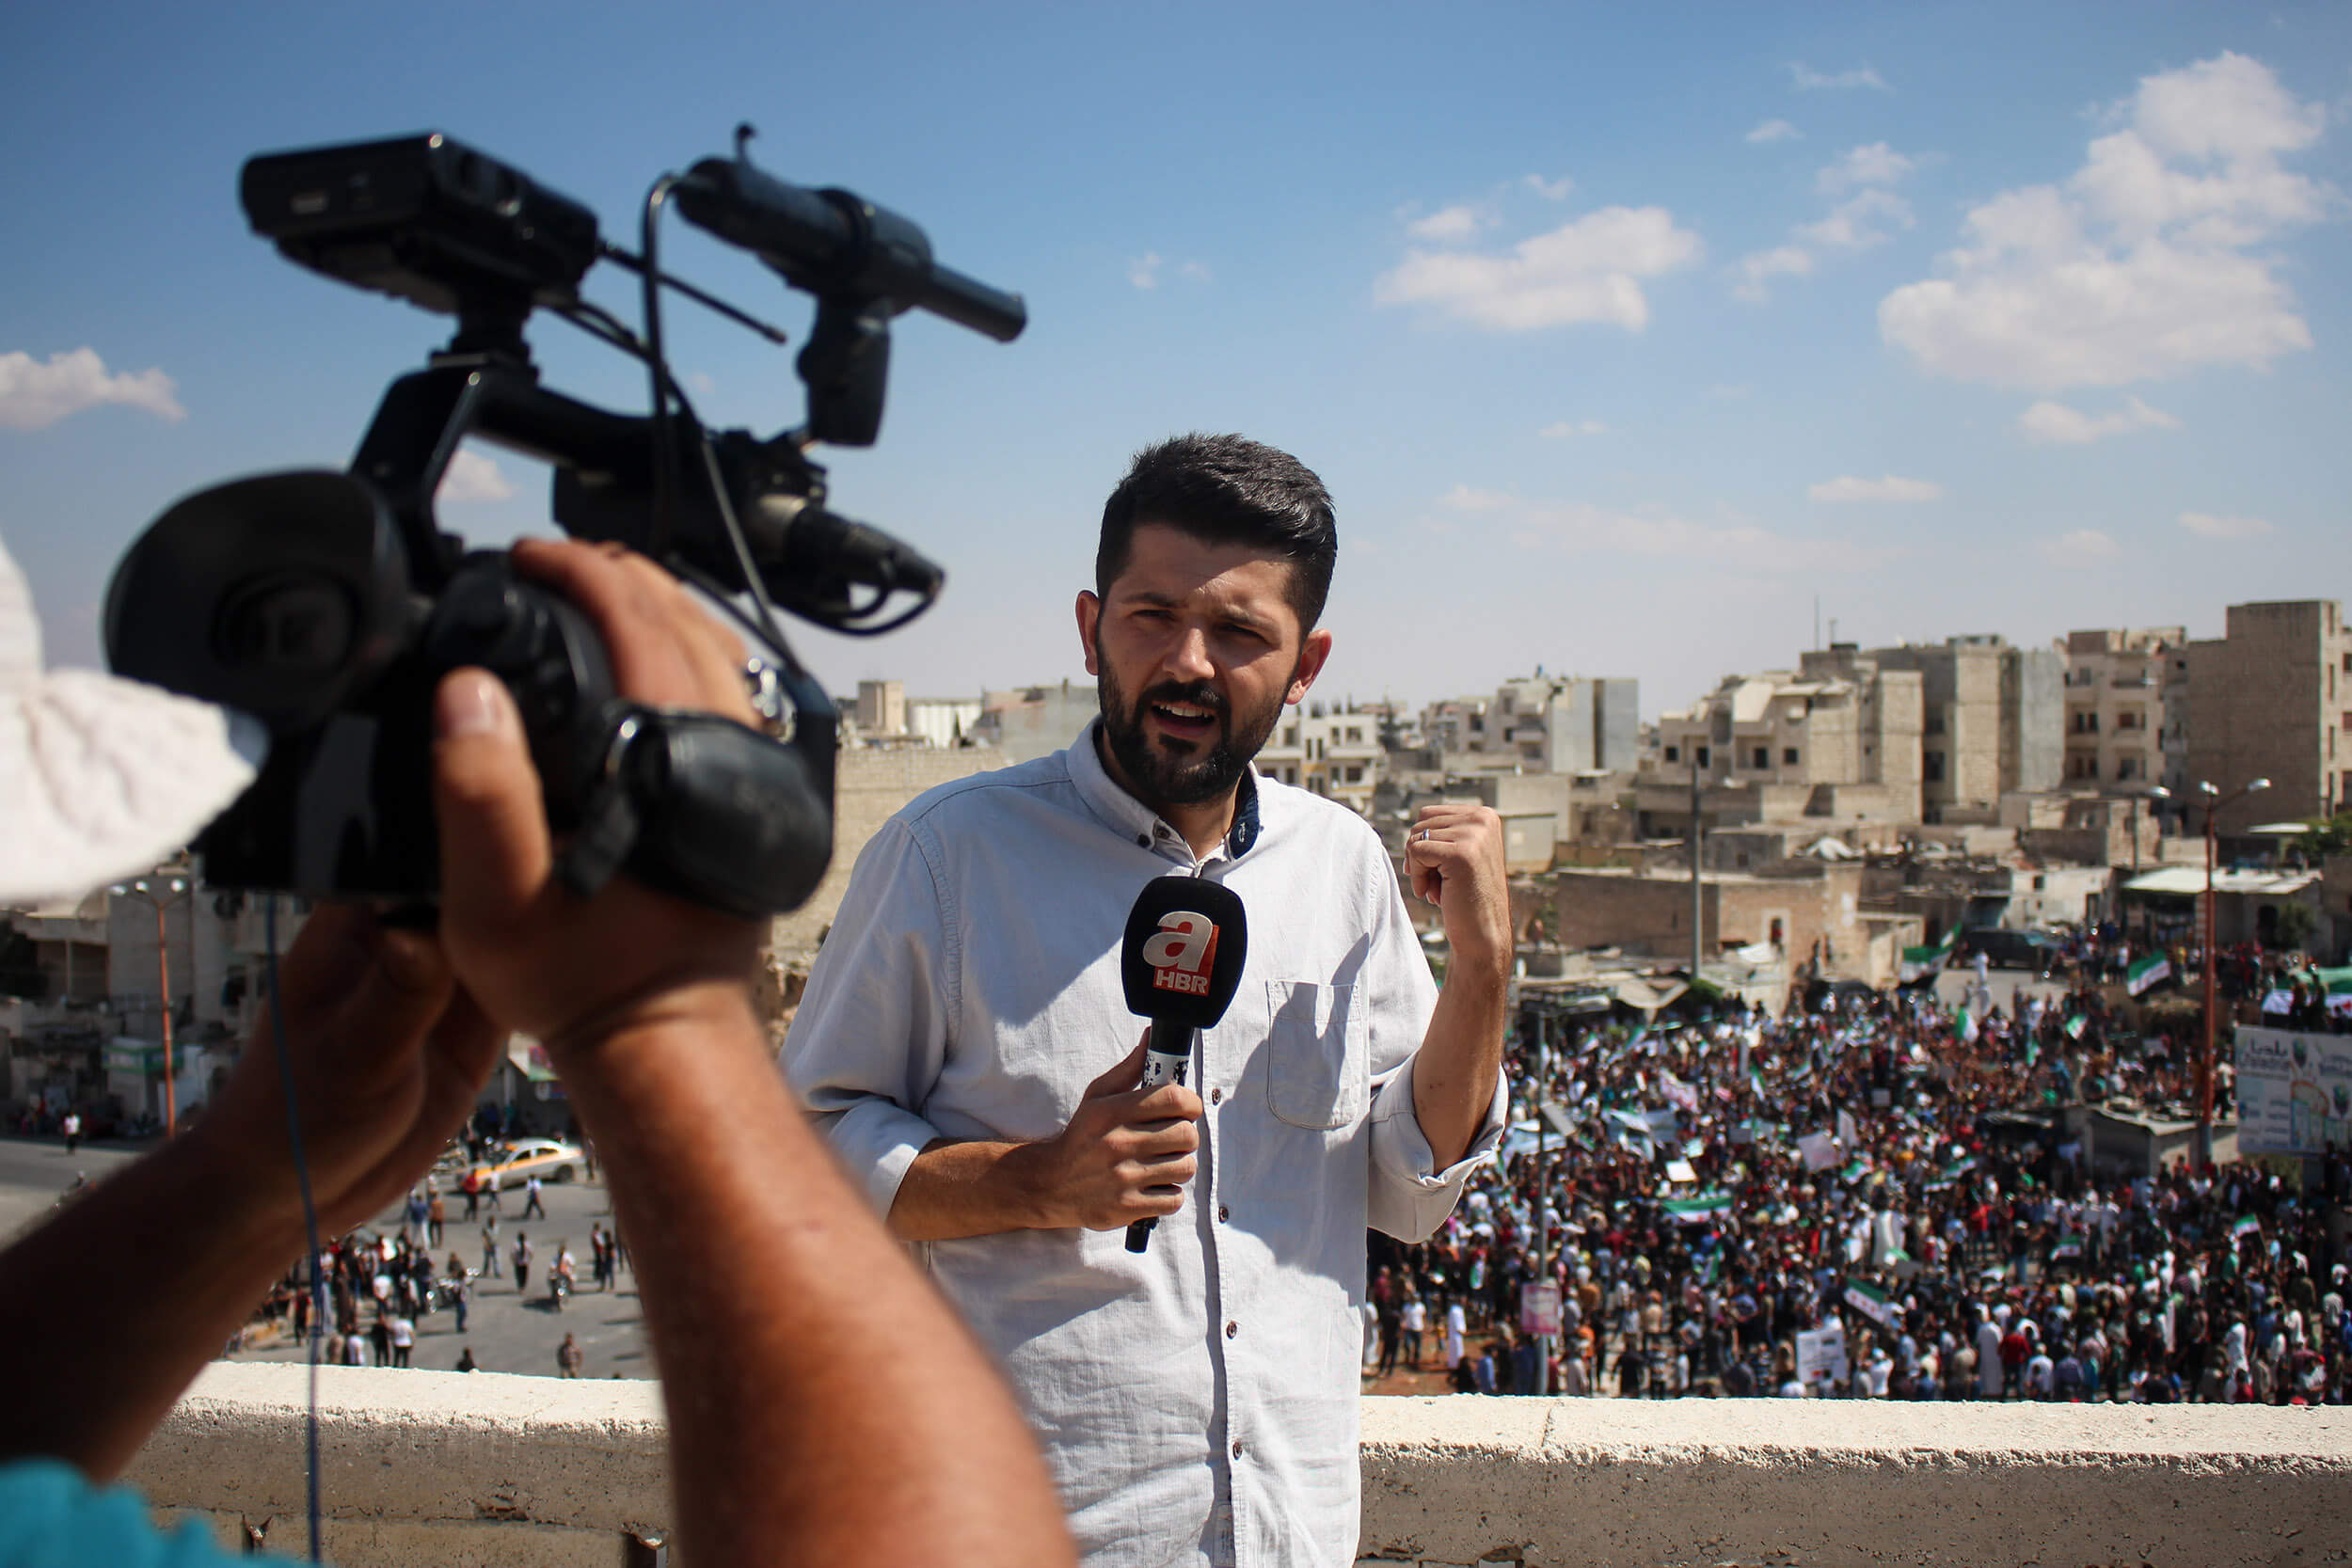 Syria: Journalists’ safety mechanisms begin with trust